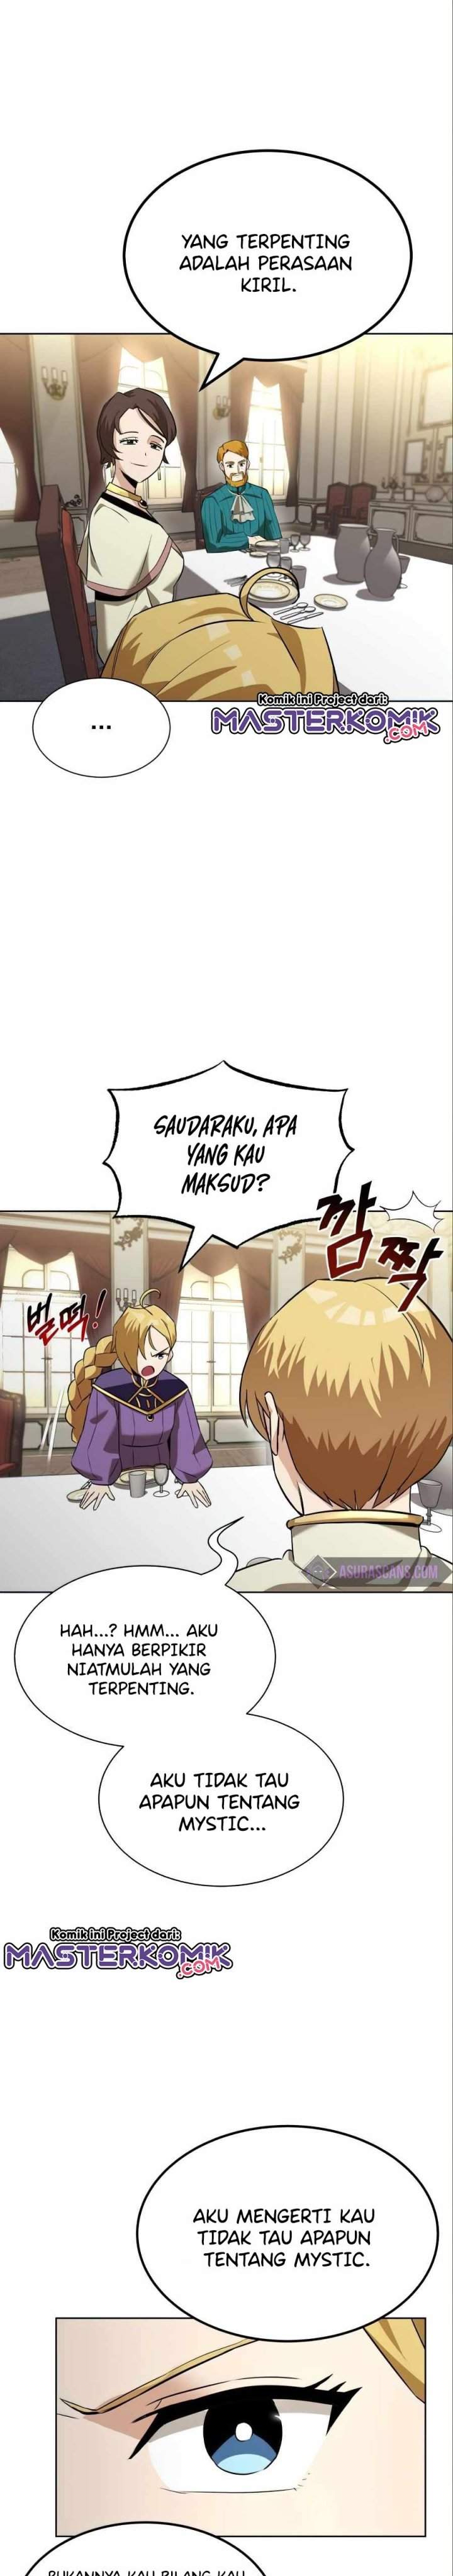 Lazy Prince Becomes a Genius Chapter 20